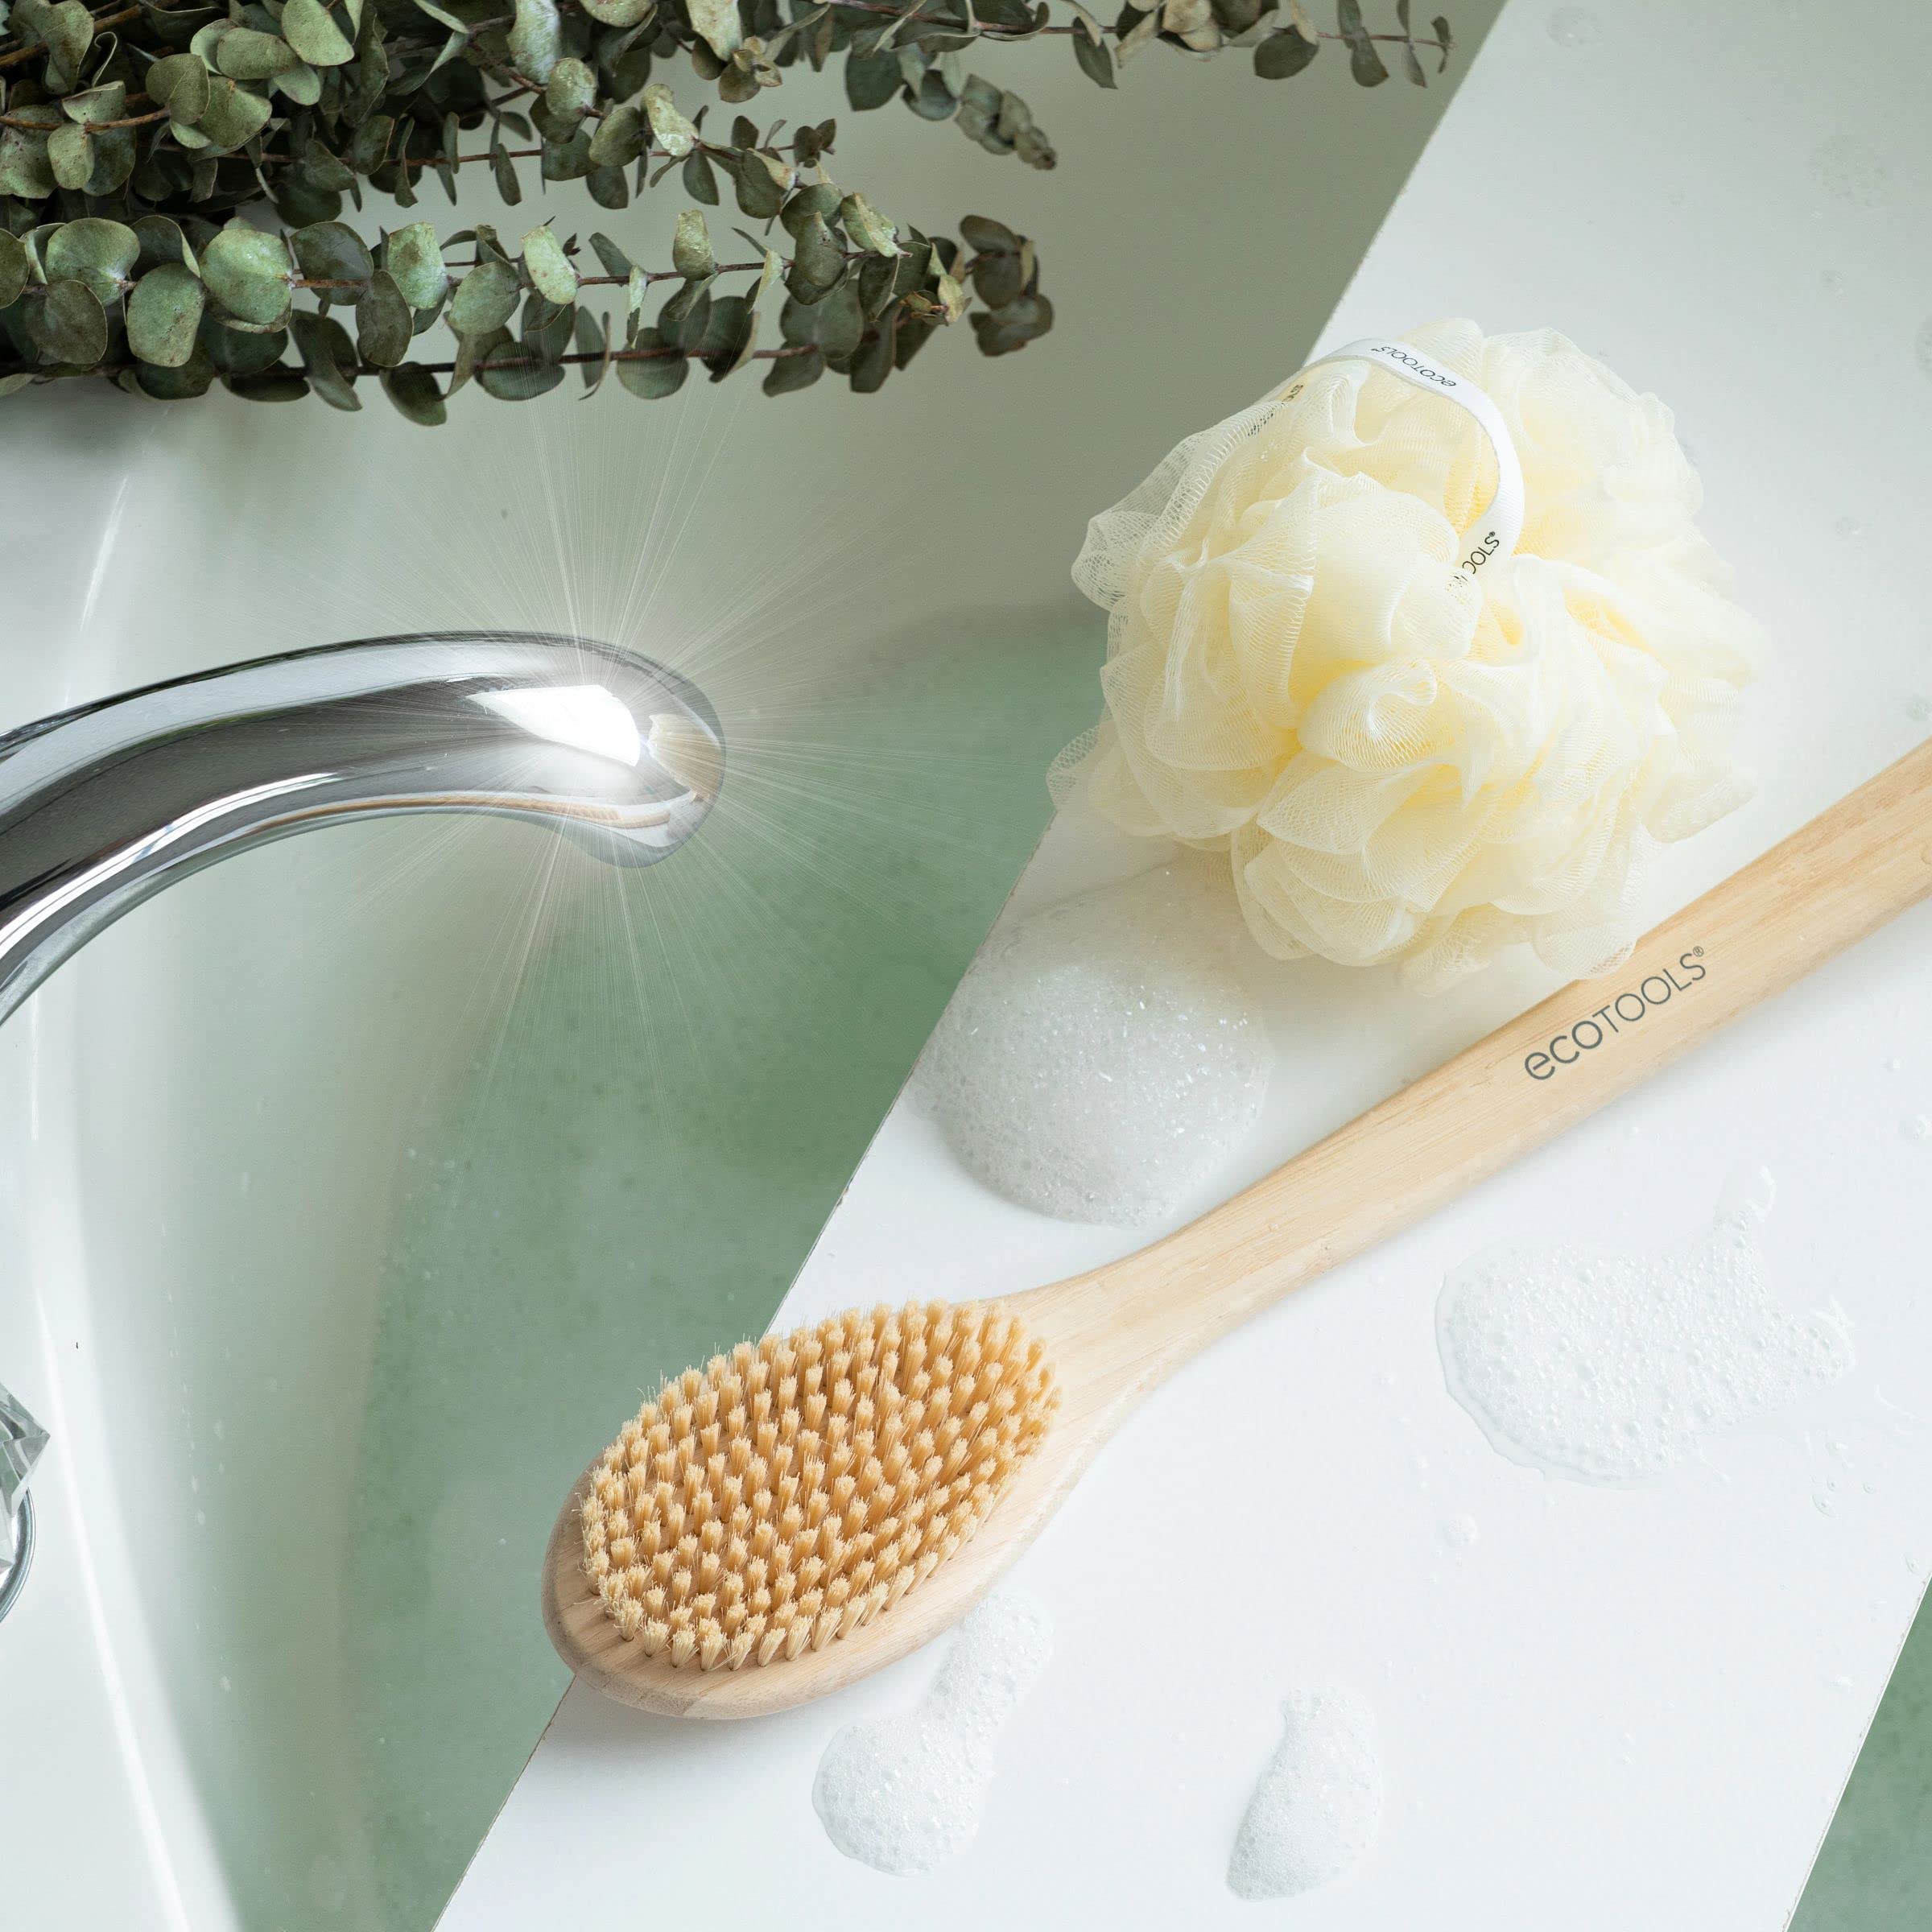 EcoTools Bristle Bath Brush, Shower Body Brush with Gentle, Stiff Bristles, Long Bamboo Handle, Gently Exfoliating for Back & Body, Stimulates Blood Circulation, Eco-Friendly, 1 Count